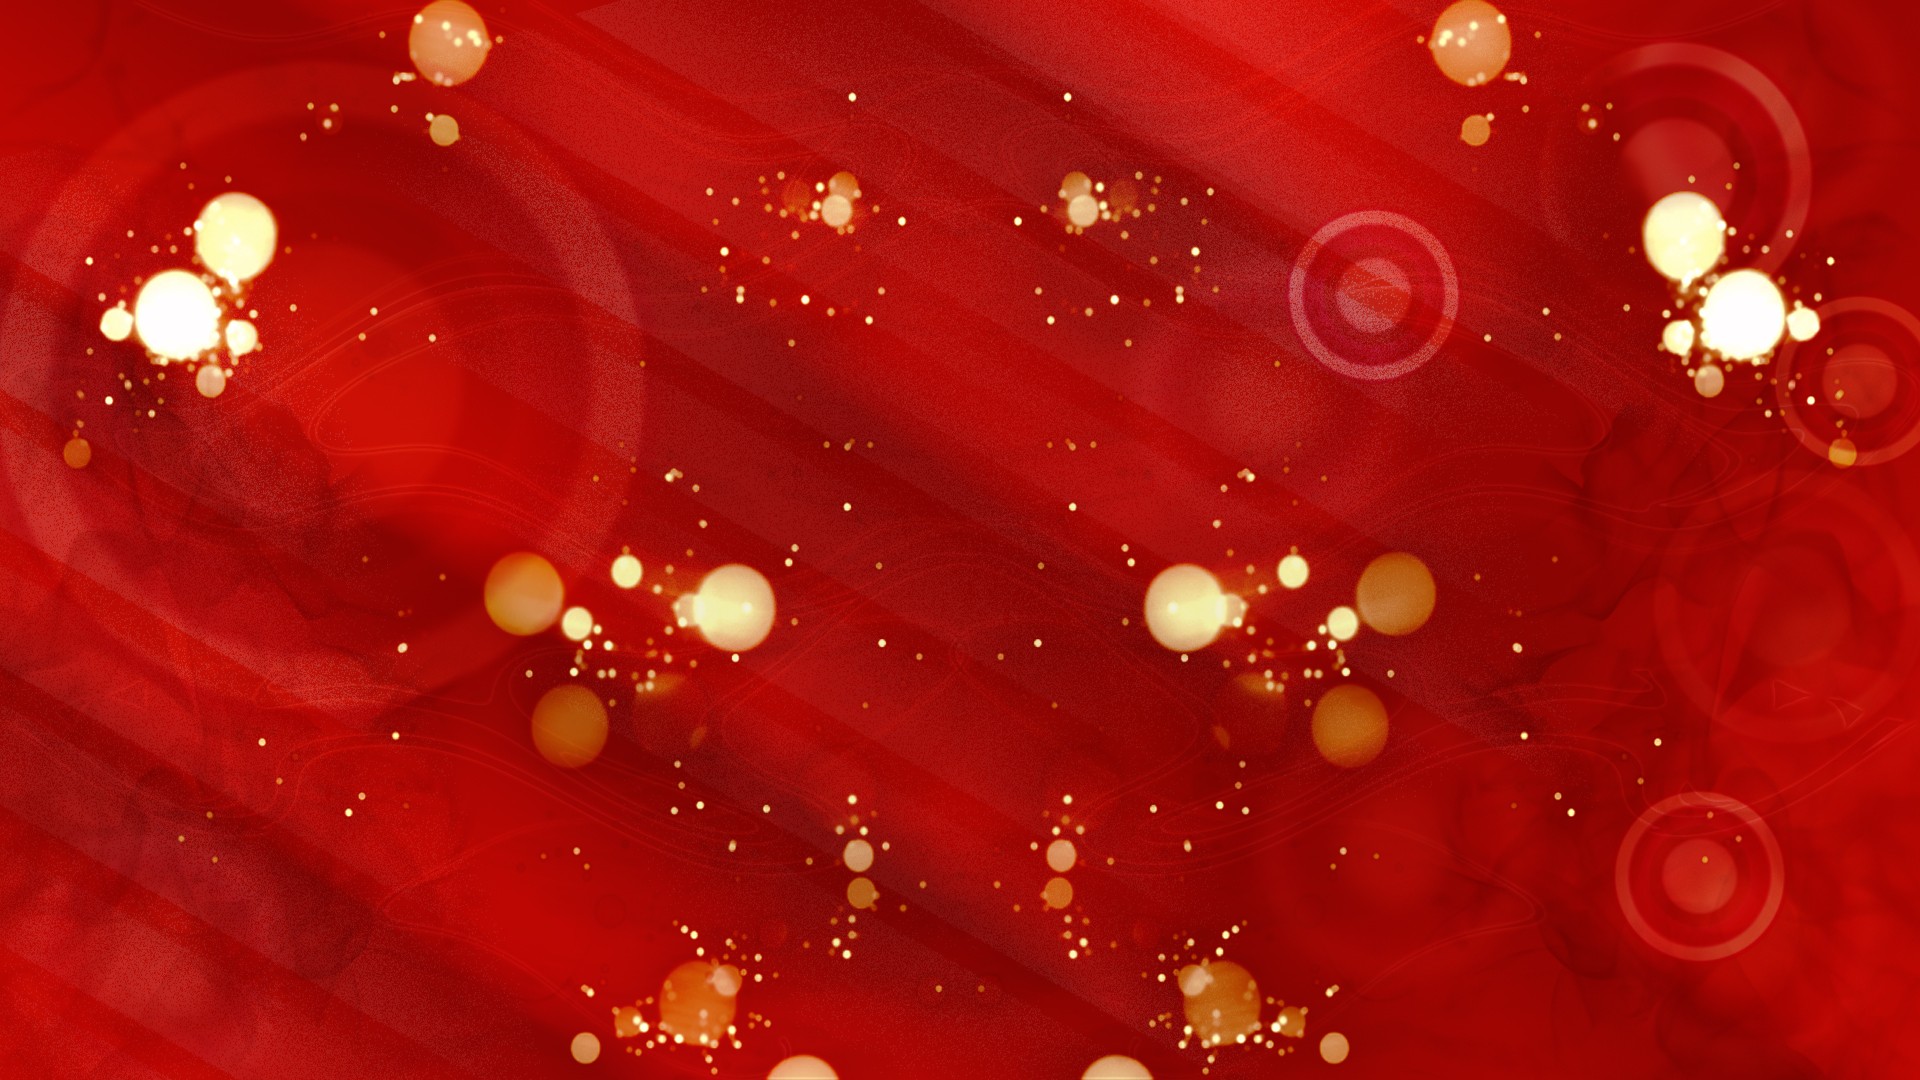 Wallpaper Abstract, golden circles on red background